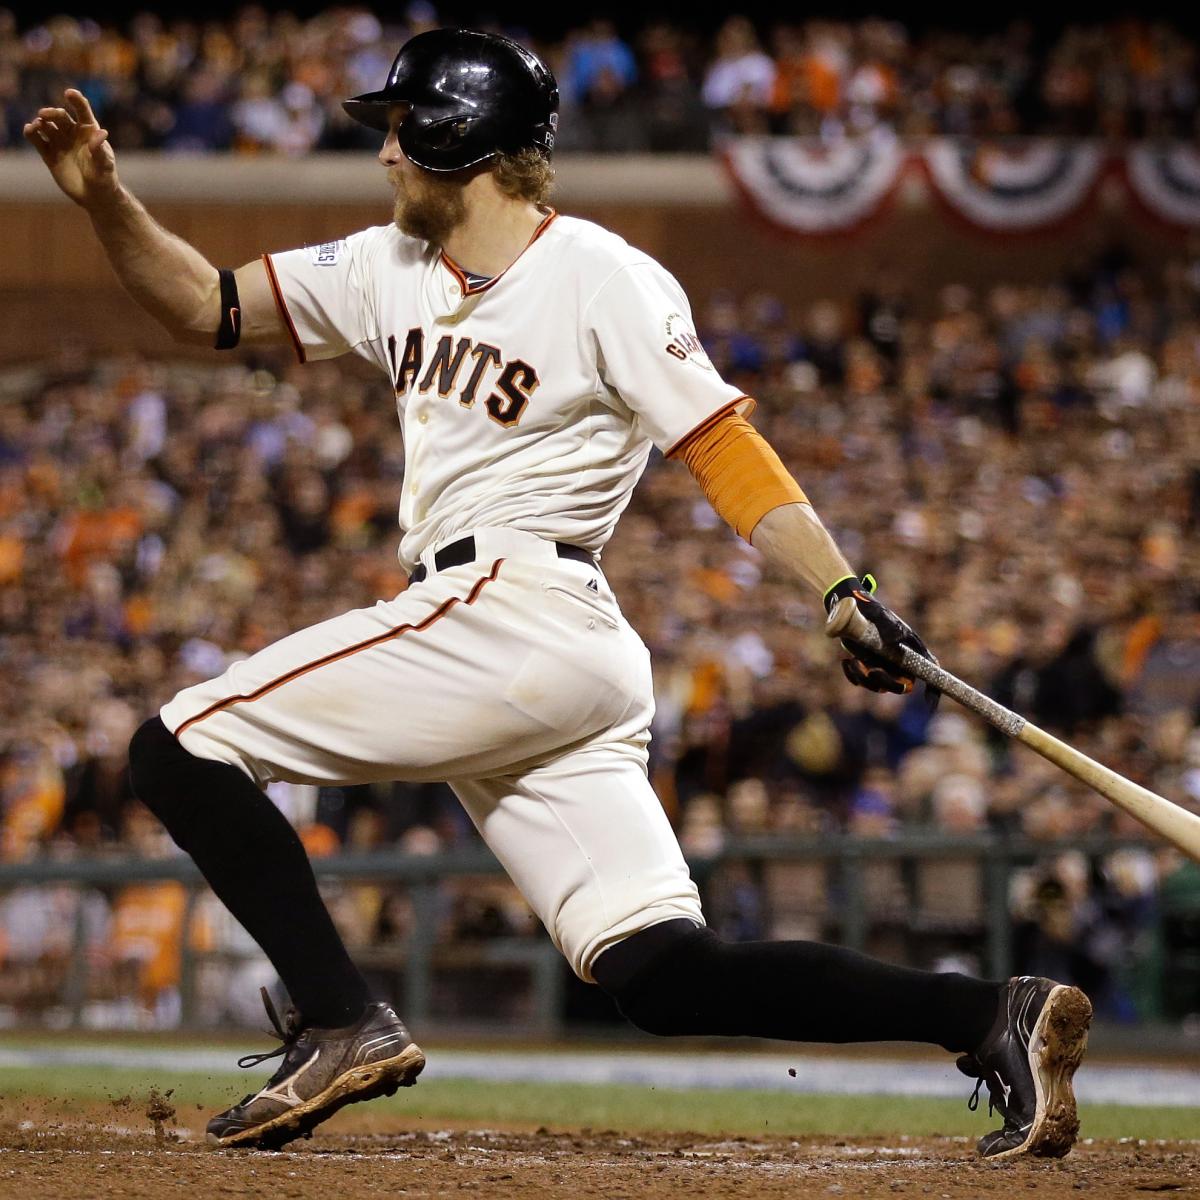 World Series  Giants 11, Royals 4: Now, it's all square